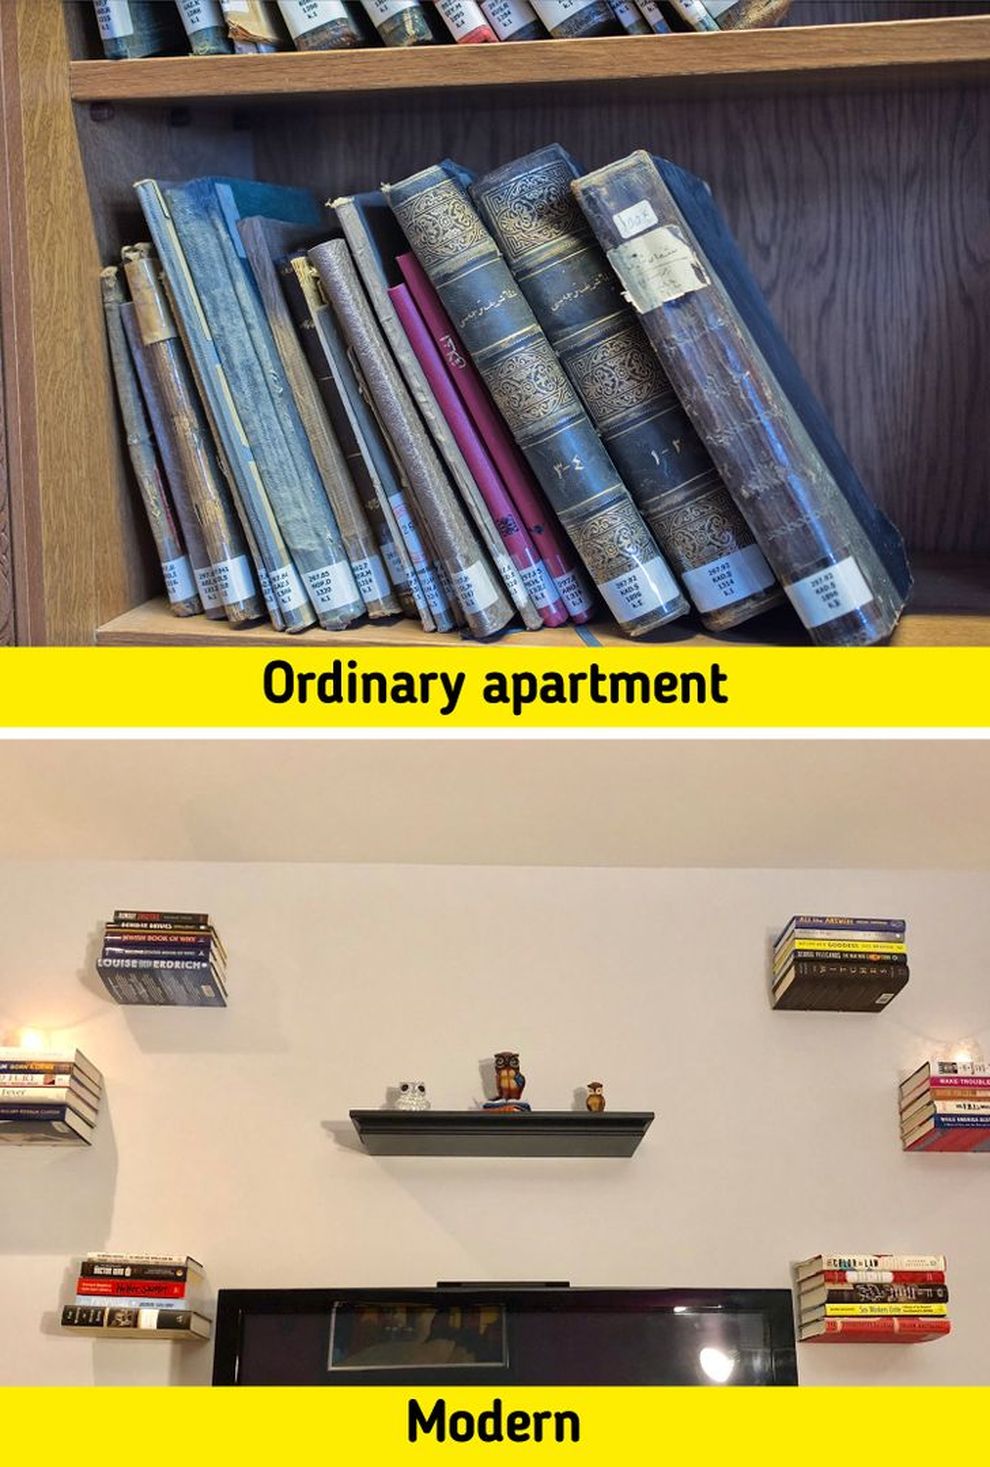 Turn an ordinary apartment into a modern one with just 10 simple items - 4